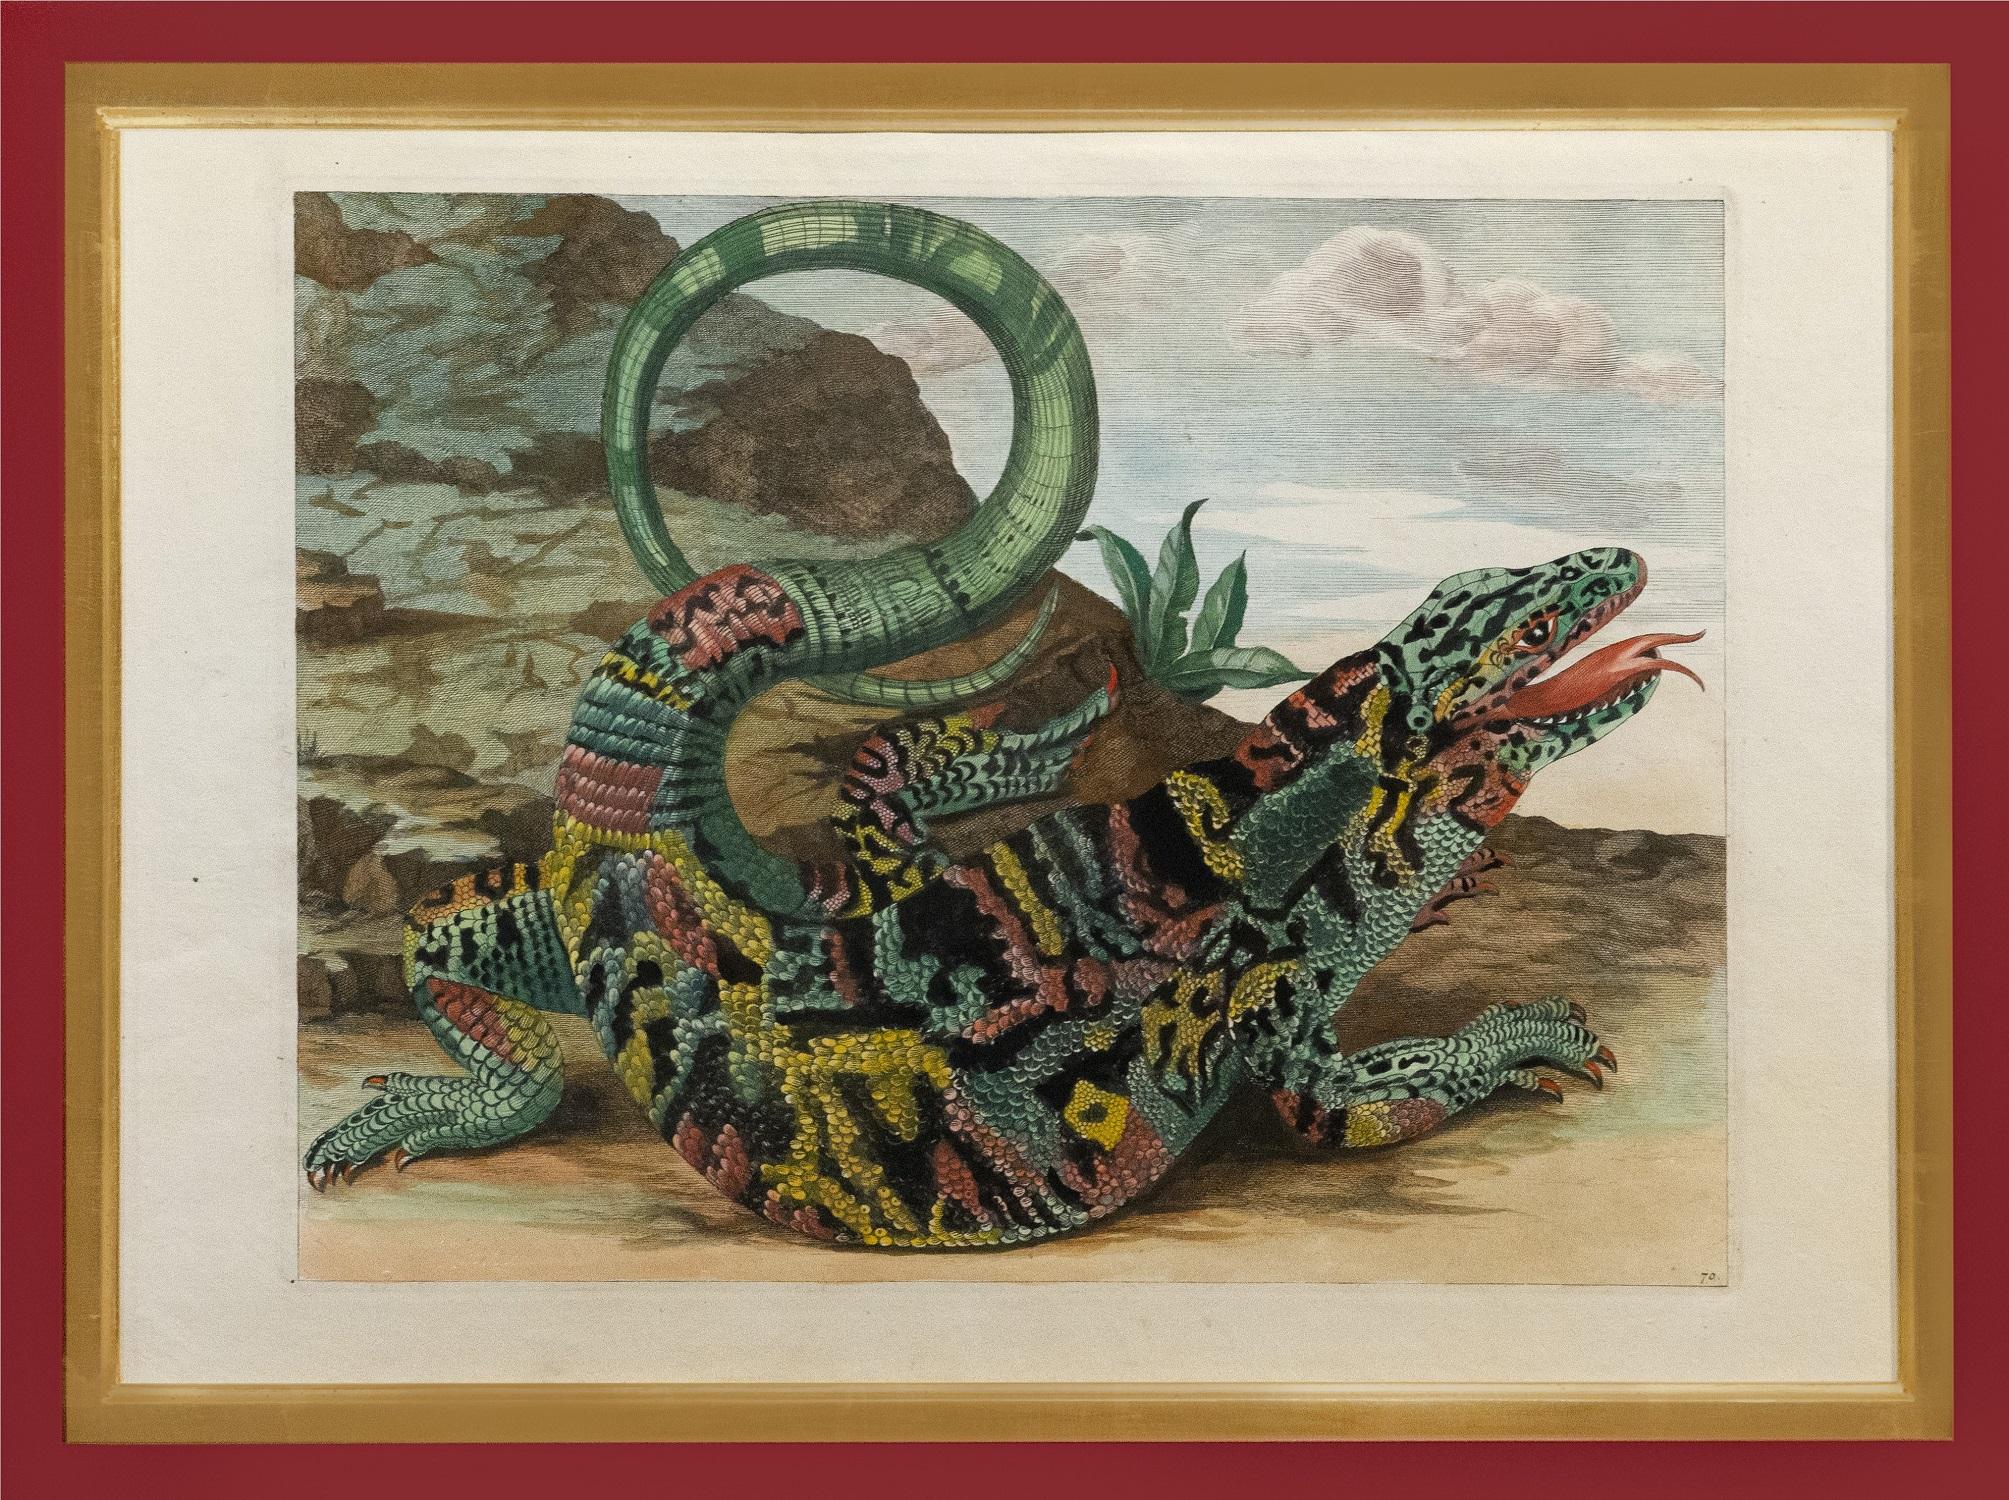 Alligator with Snake and a Lizard.   - Print by (After) Maria Sybilla Merian